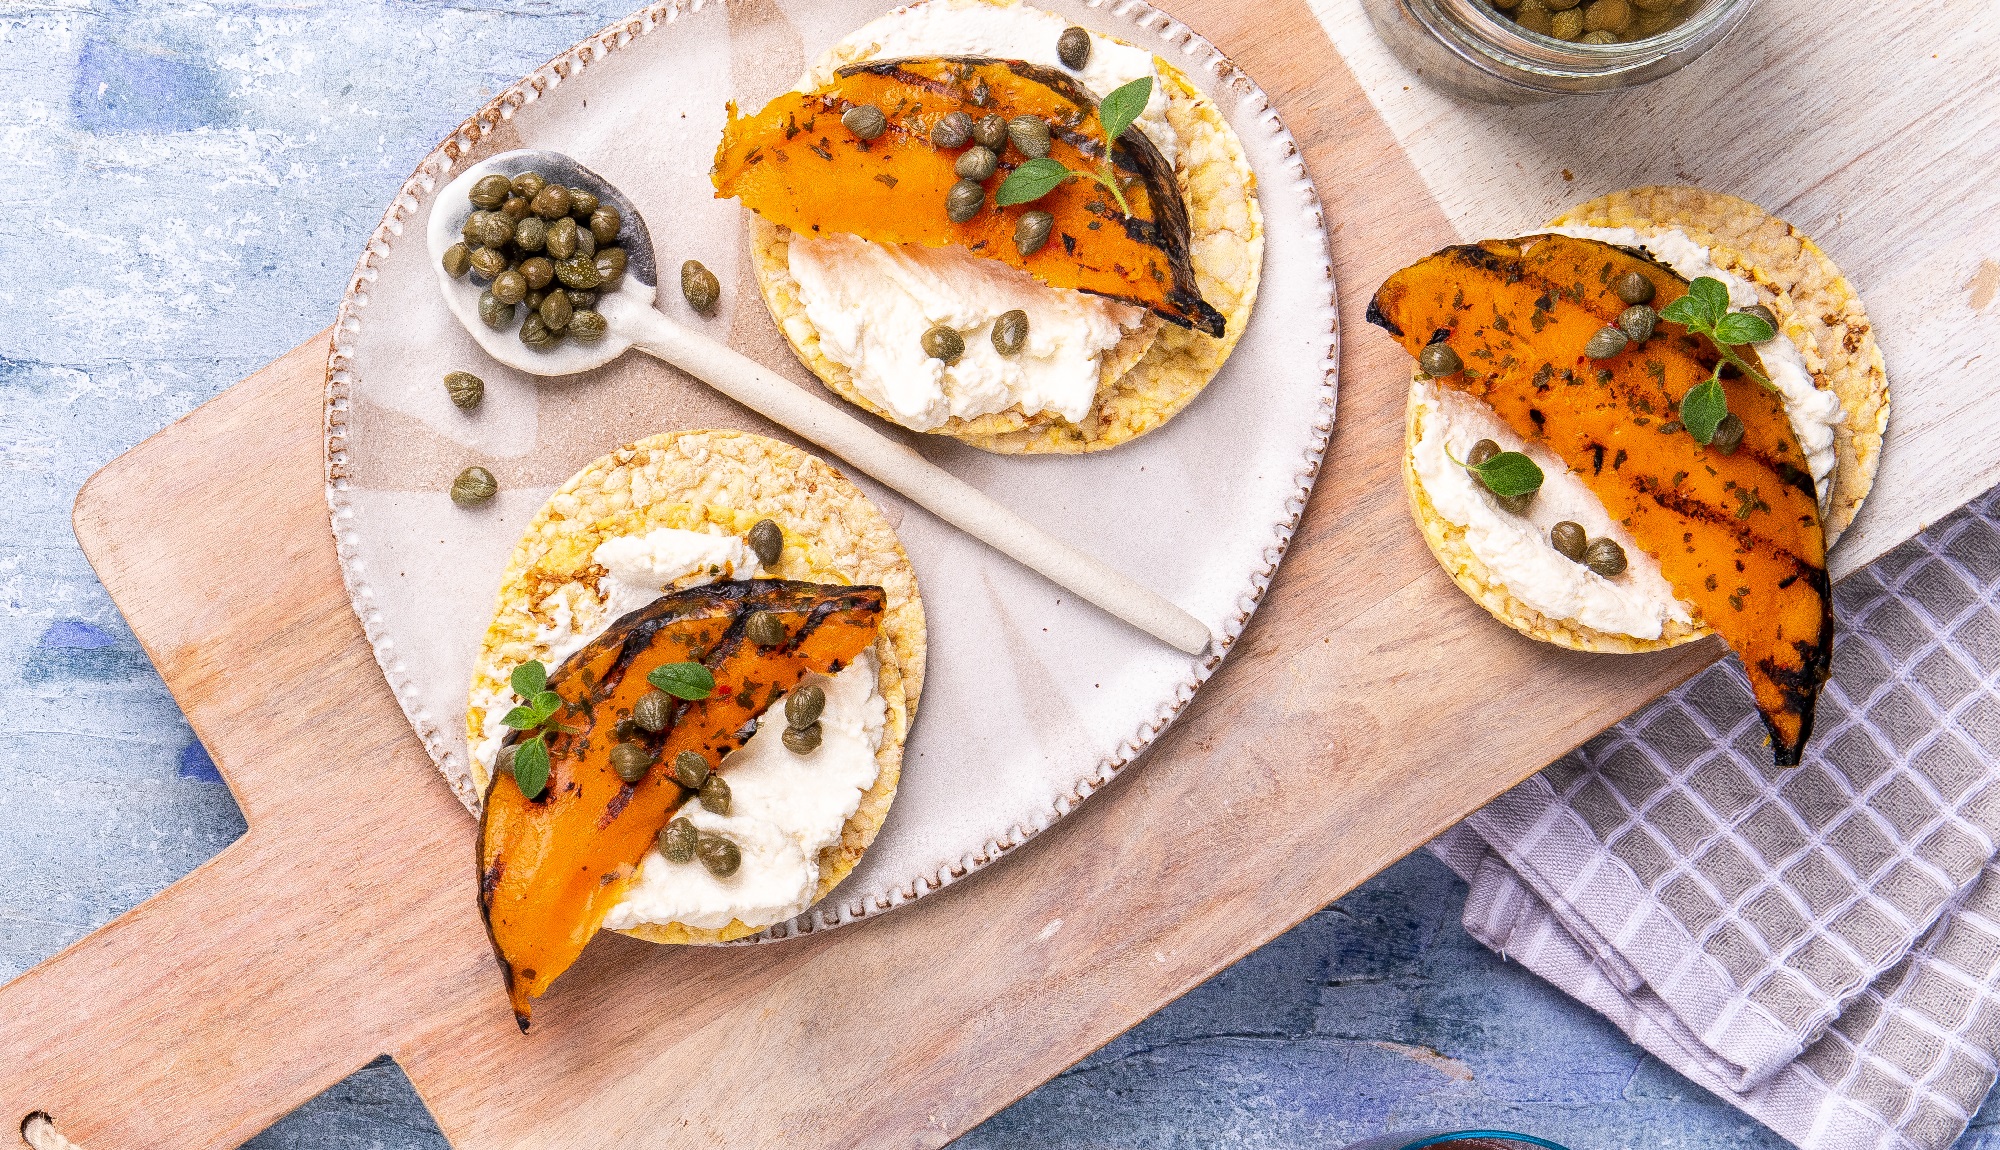 Ricotta, roast pumpkin & capers on Corn Thins slices for lunch